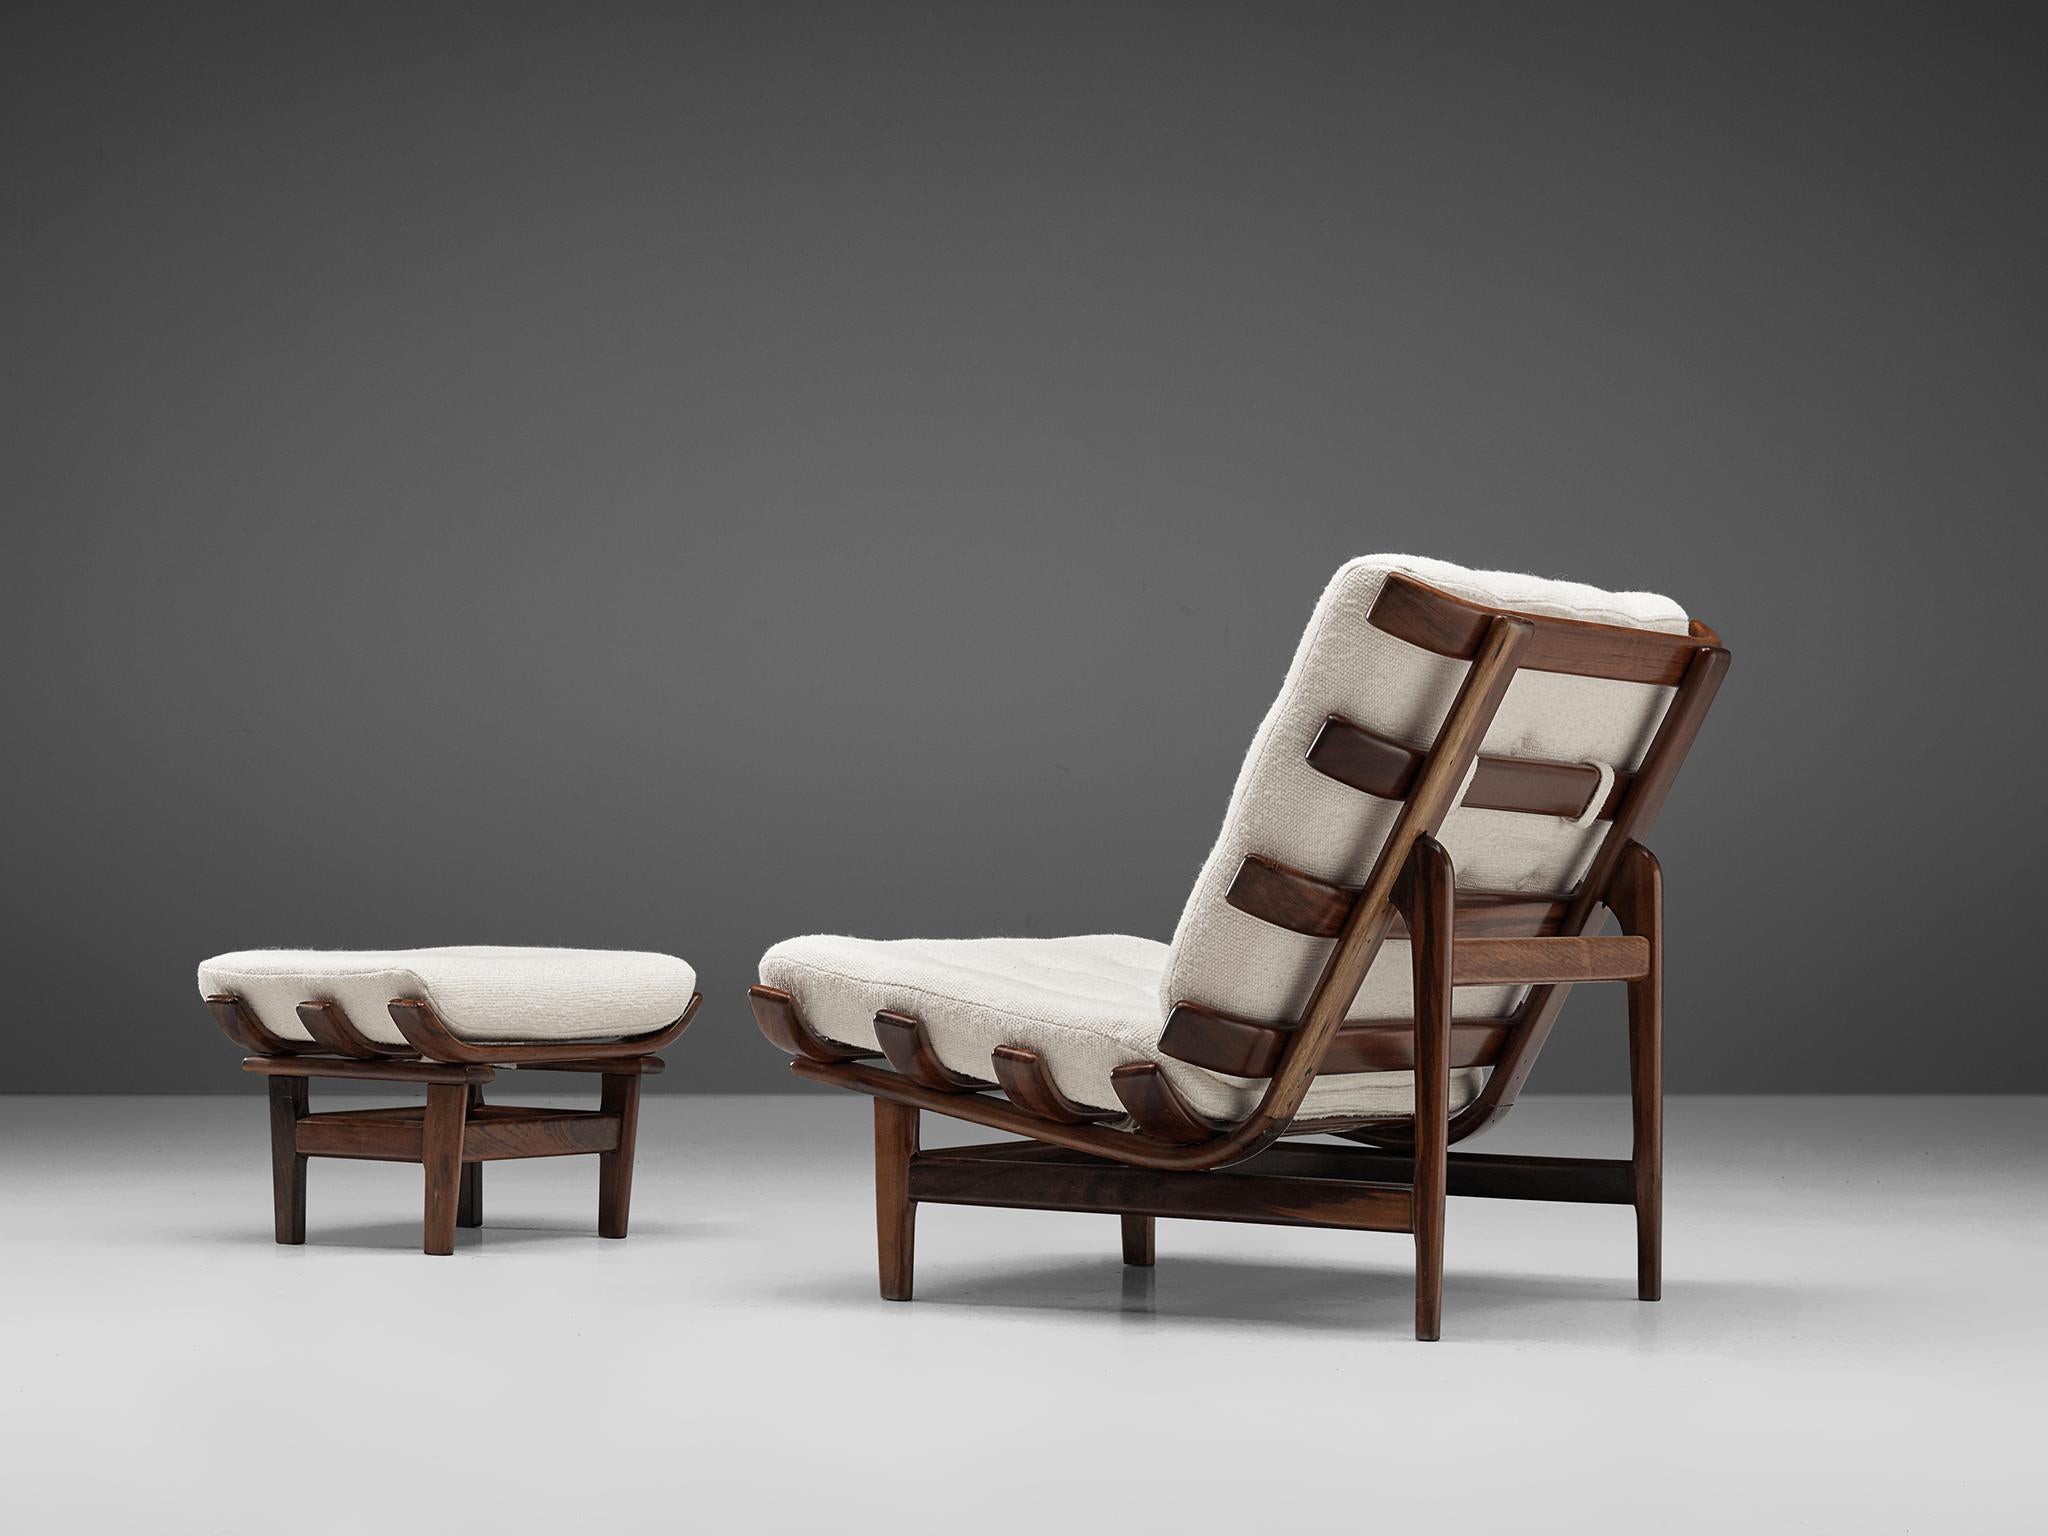 Móveis Pailar, bone lounge chair with ottoman, jacaranda wood, Brazil, 1960s. 

Wonderful chair with rhythmic frame that reminds of an organic rib structure. Tufted cushions that you can take off as well. A wonderful design that reminds of the